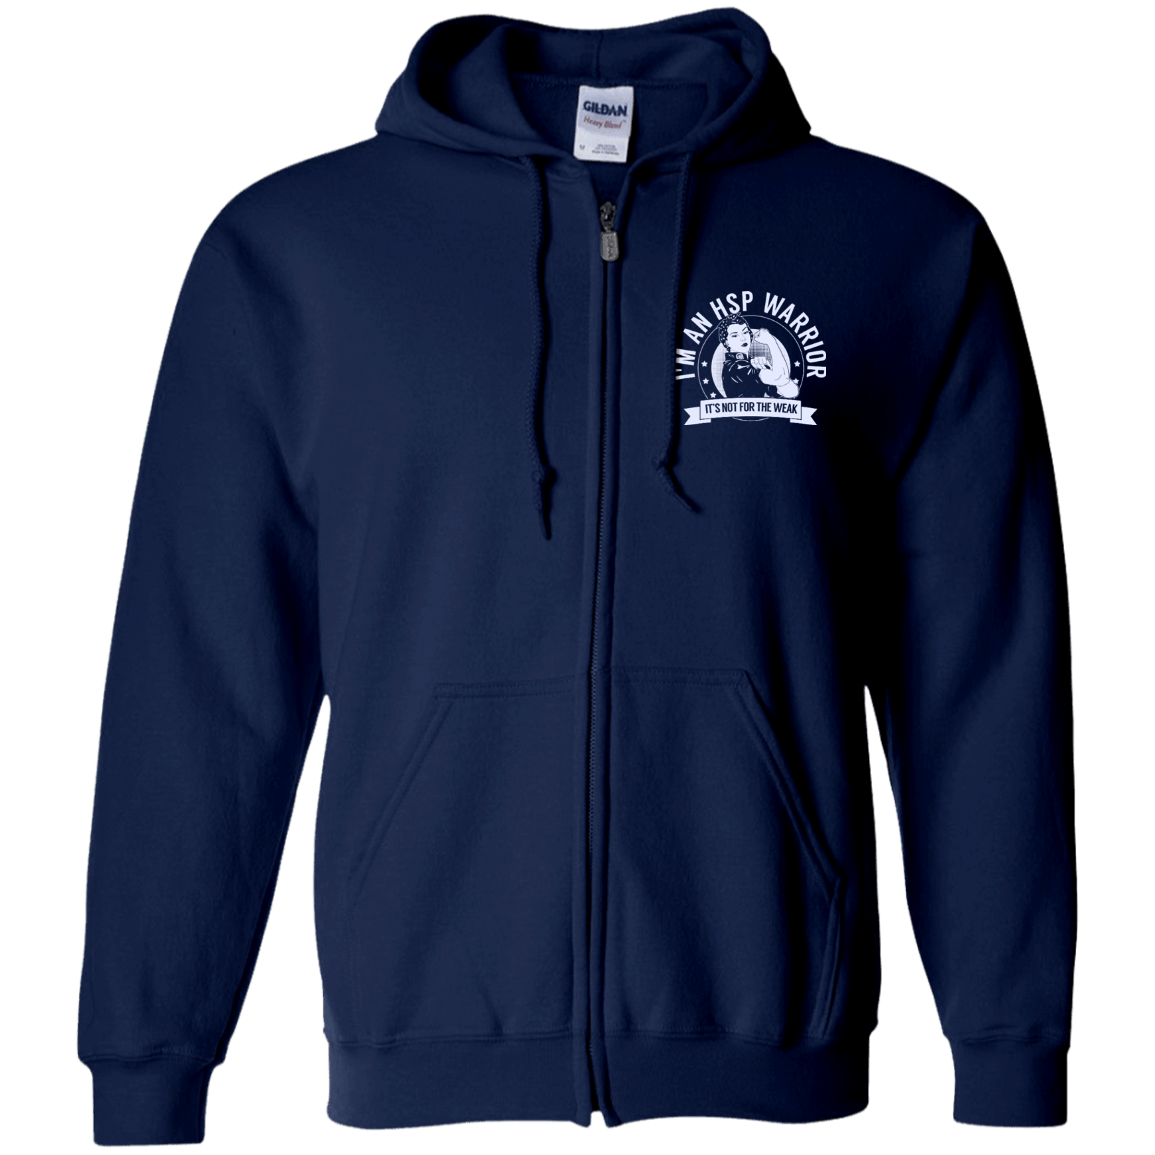 Hereditary Spastic Paraparesis - HSP Warrior Not For The Weak Zip Up Hooded Sweatshirt - The Unchargeables